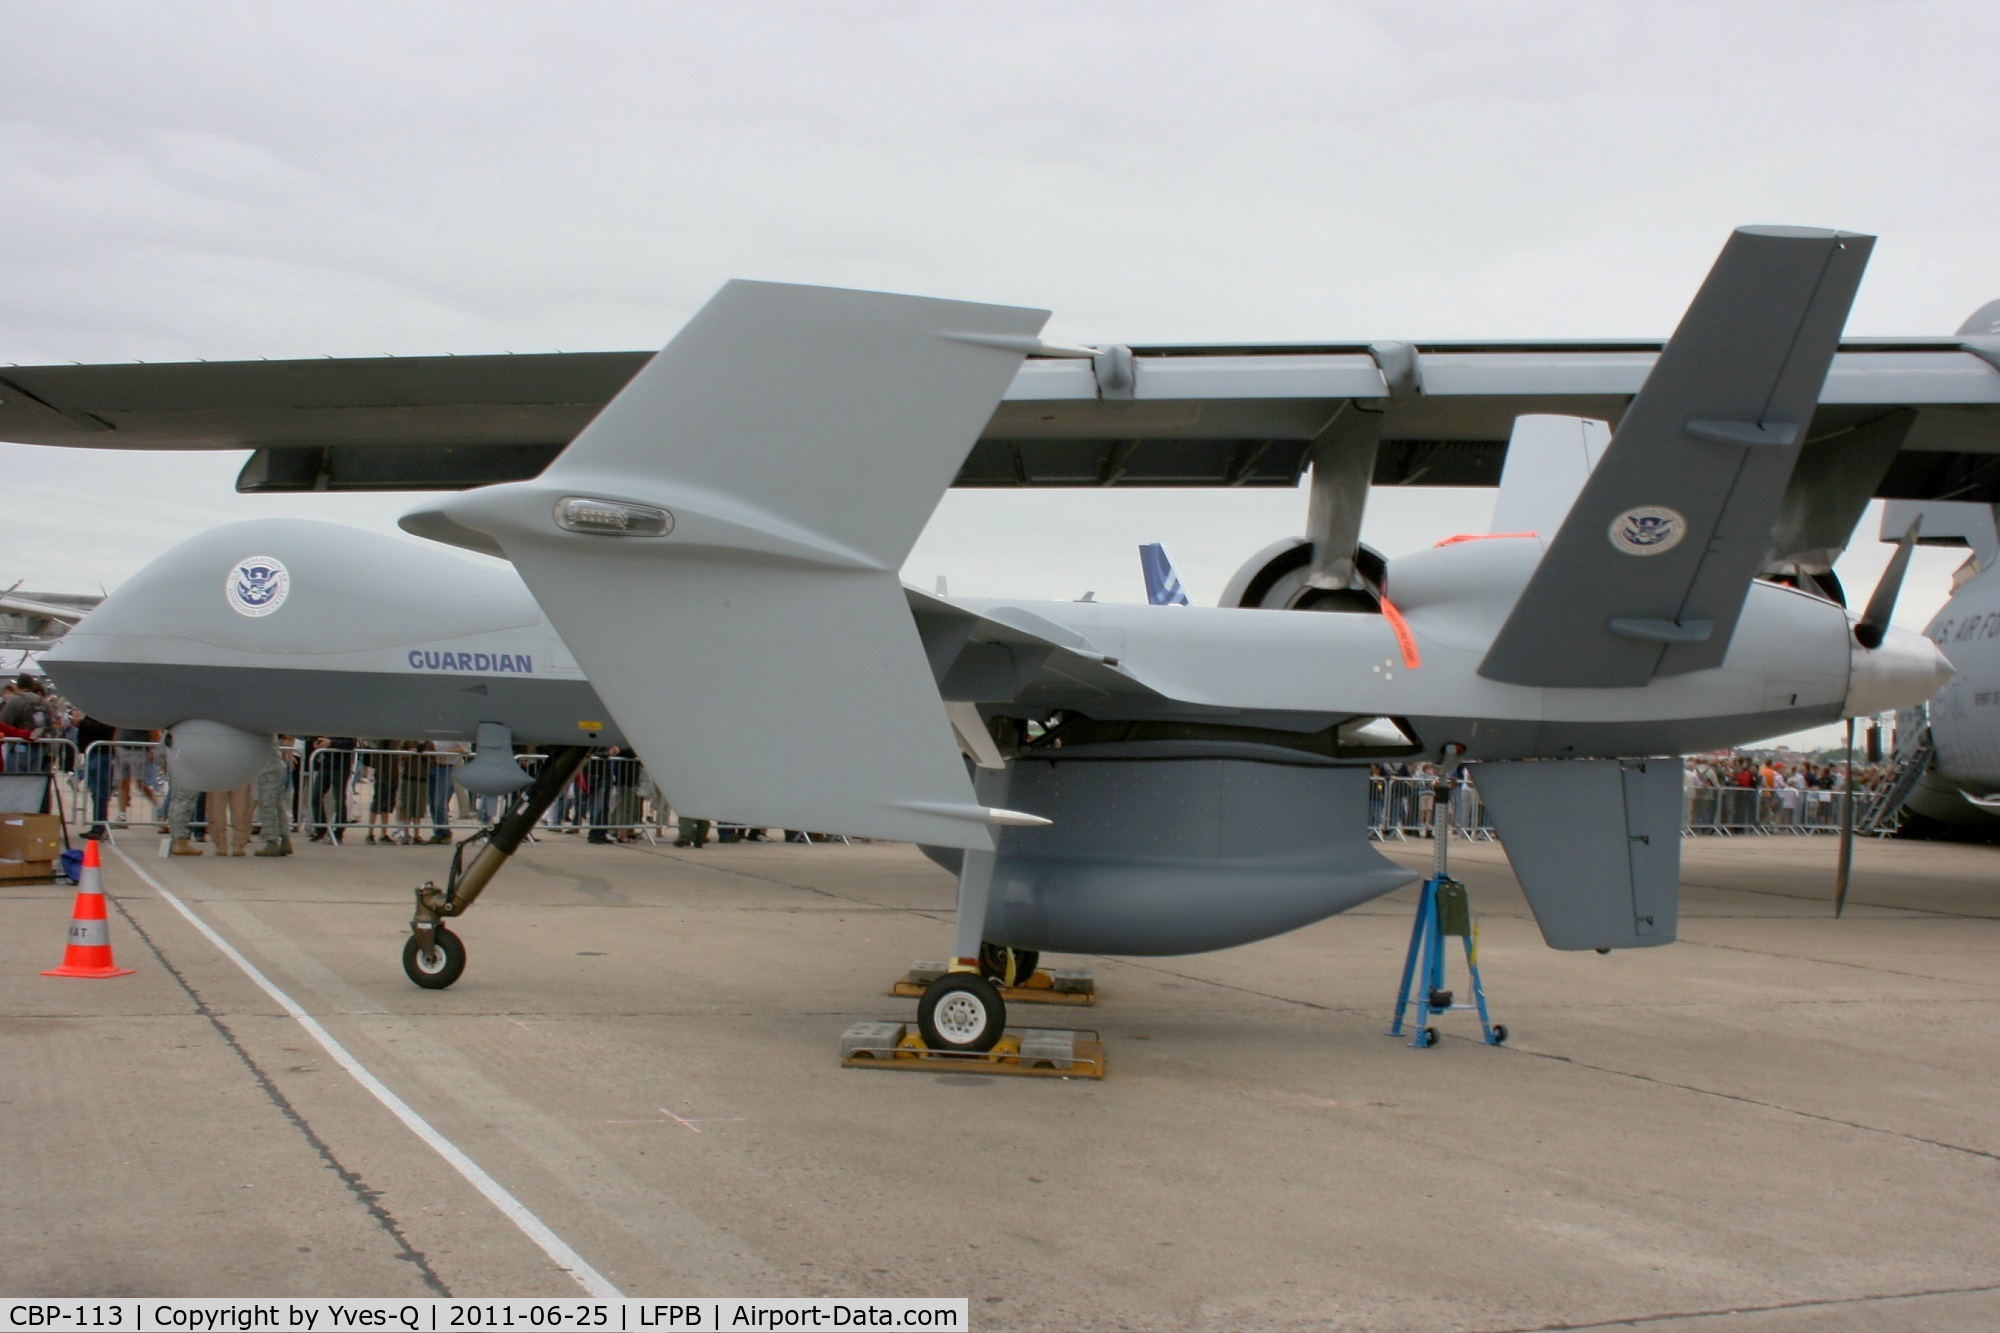 CBP-113, General Atomics MQ-9B Guardian C/N Not found CBP-113, General Atomics Aeronautical System Inc MQ-9B Guardian, US Department of Homeland Security, Displayed at Paris Le Bourget (LFPB-LBG) Air Show in june 2011. This UAV is used for border patrol and drugs smuggling surveillance operations.